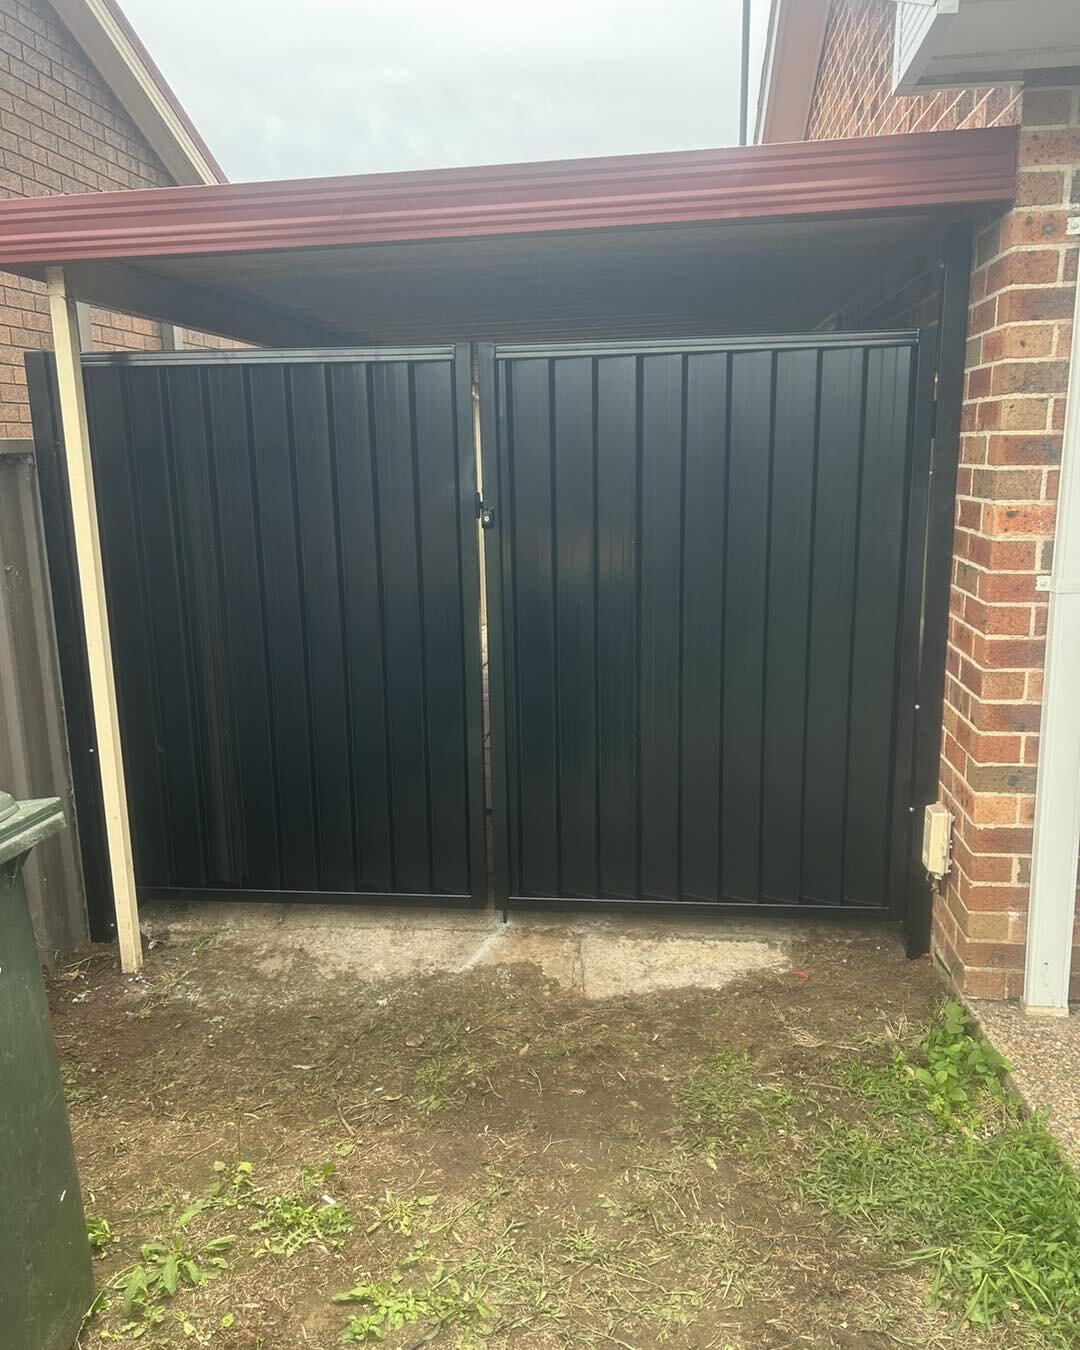 With a break in the weather we replaced some existing tired gates with new double gates for carport access with none other than a D &amp; D Technologies double lockable gate latch allowing key able access from either side. We only use D &amp; D Techn